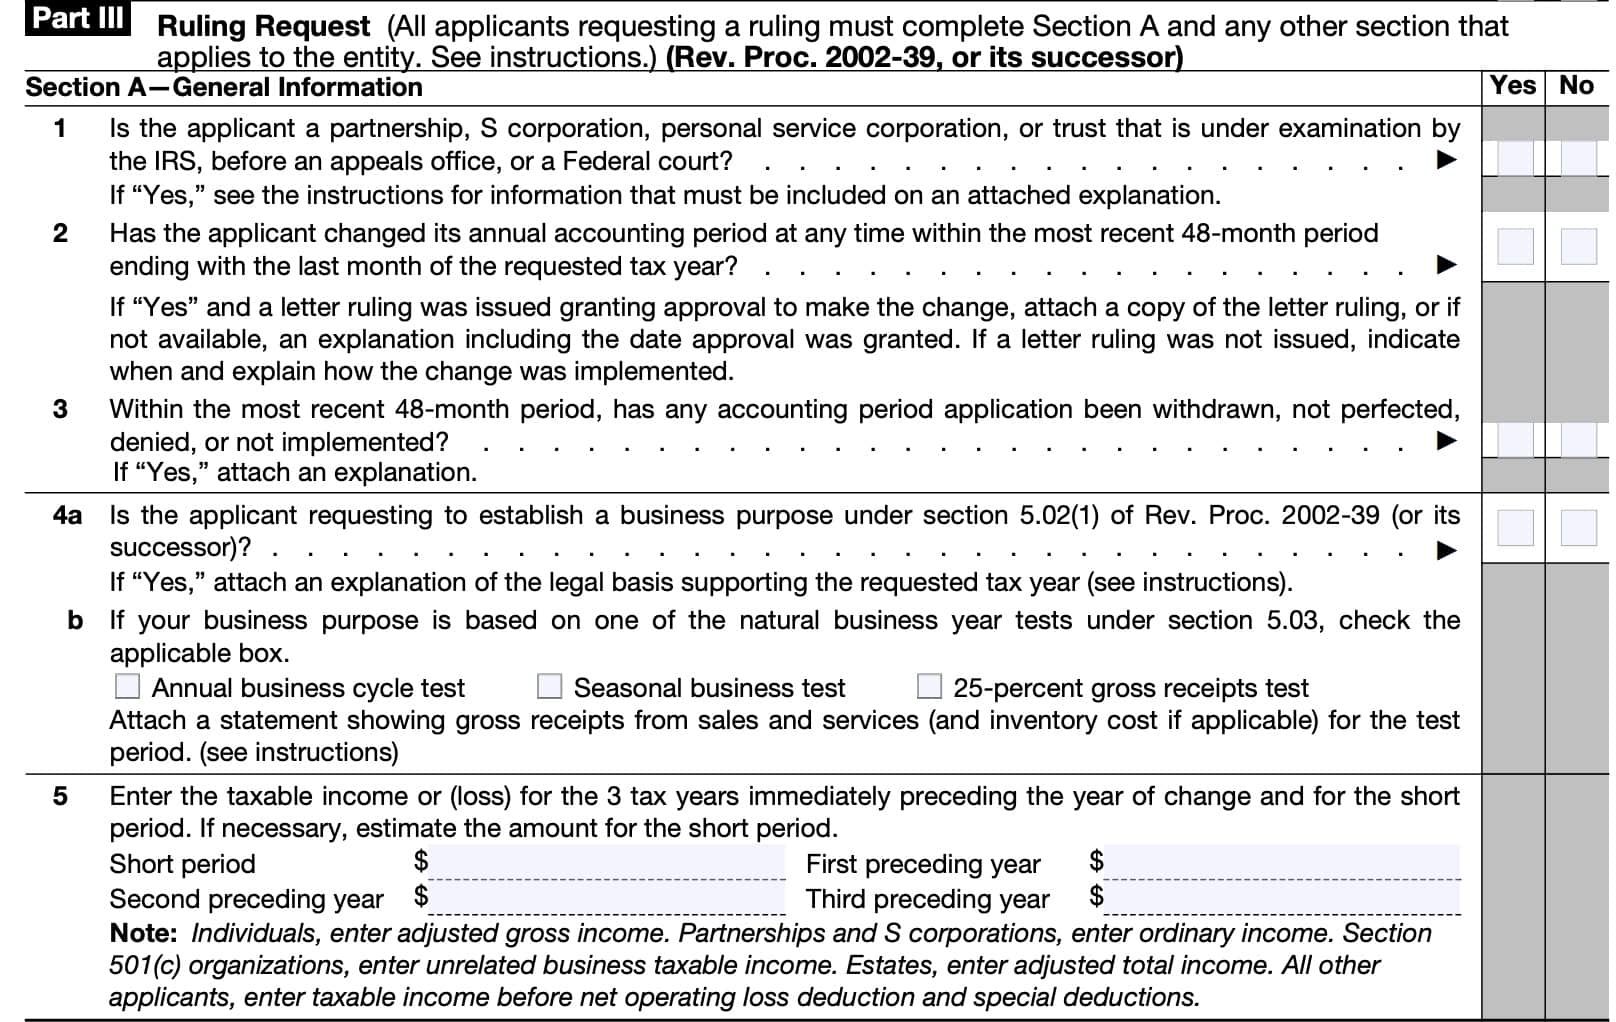 irs form 1128, part iii, section a, general information (top)